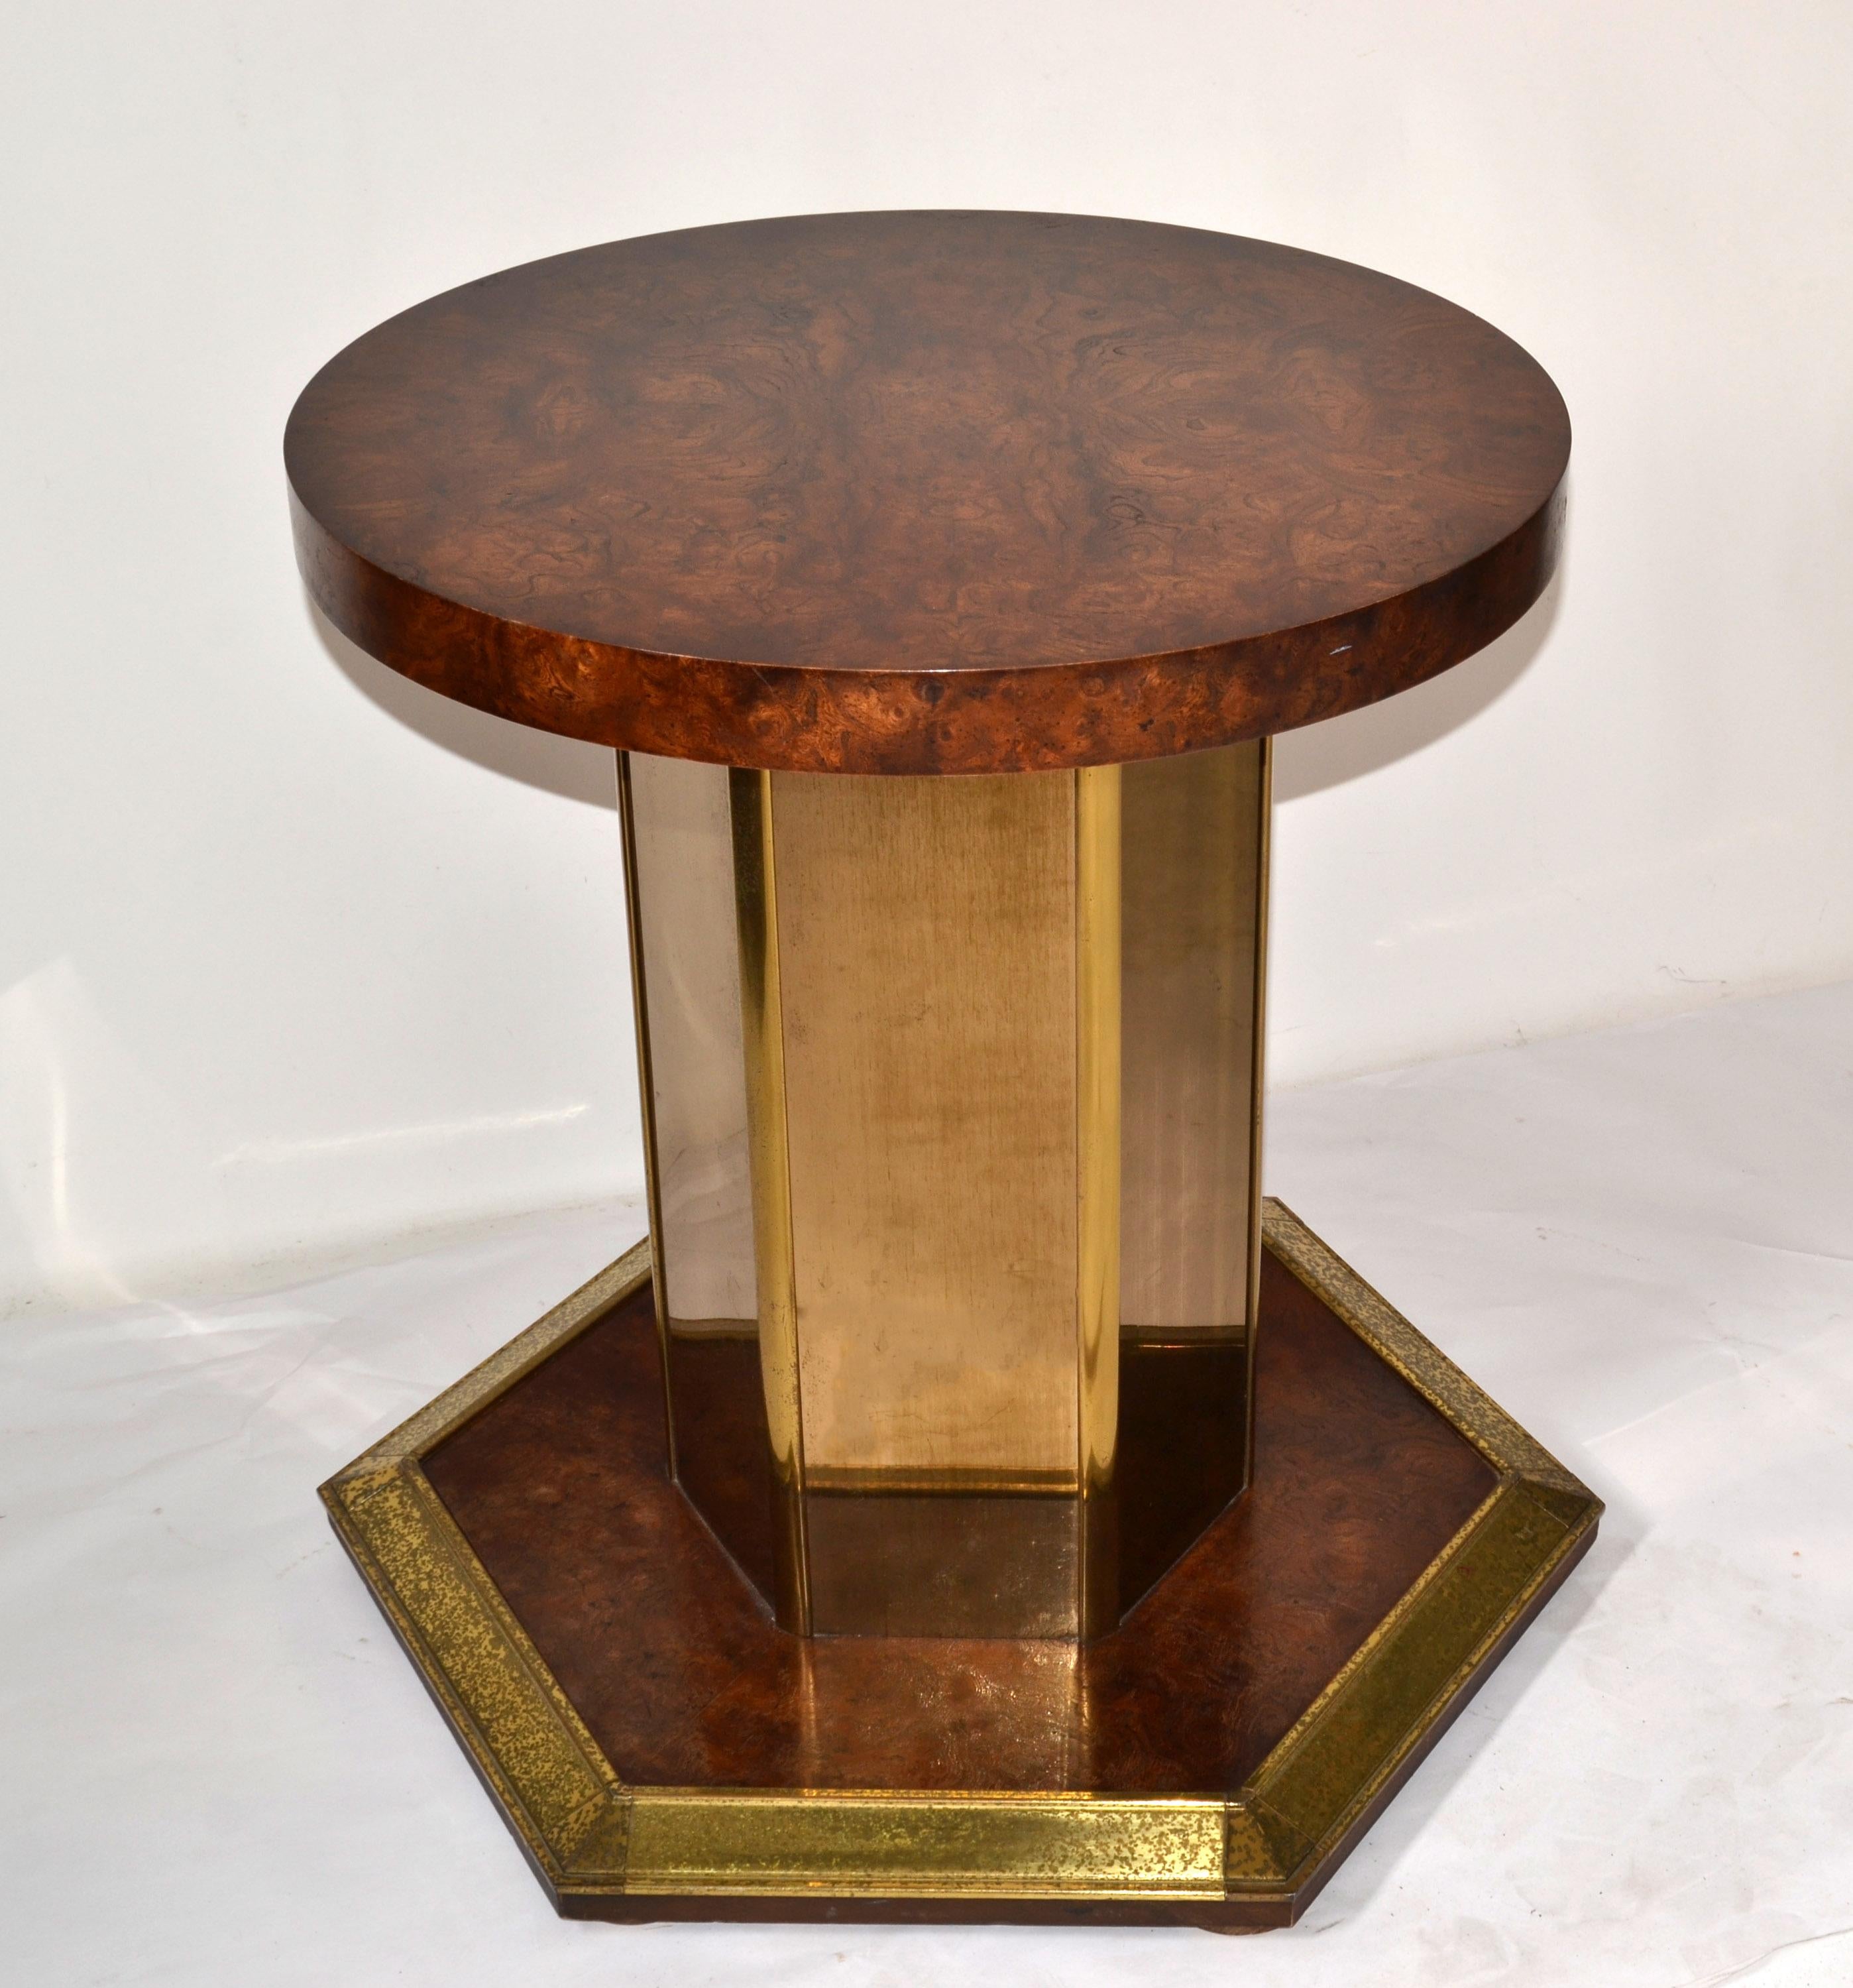 Round Henredon Mid-Century Modern brass, burl wood table top, faceted mirrored Glass Panels and supported with octagonal base beautifully designed and manufactured by Henredon.
Substantial geometric mirrored Center could be used as a dining table